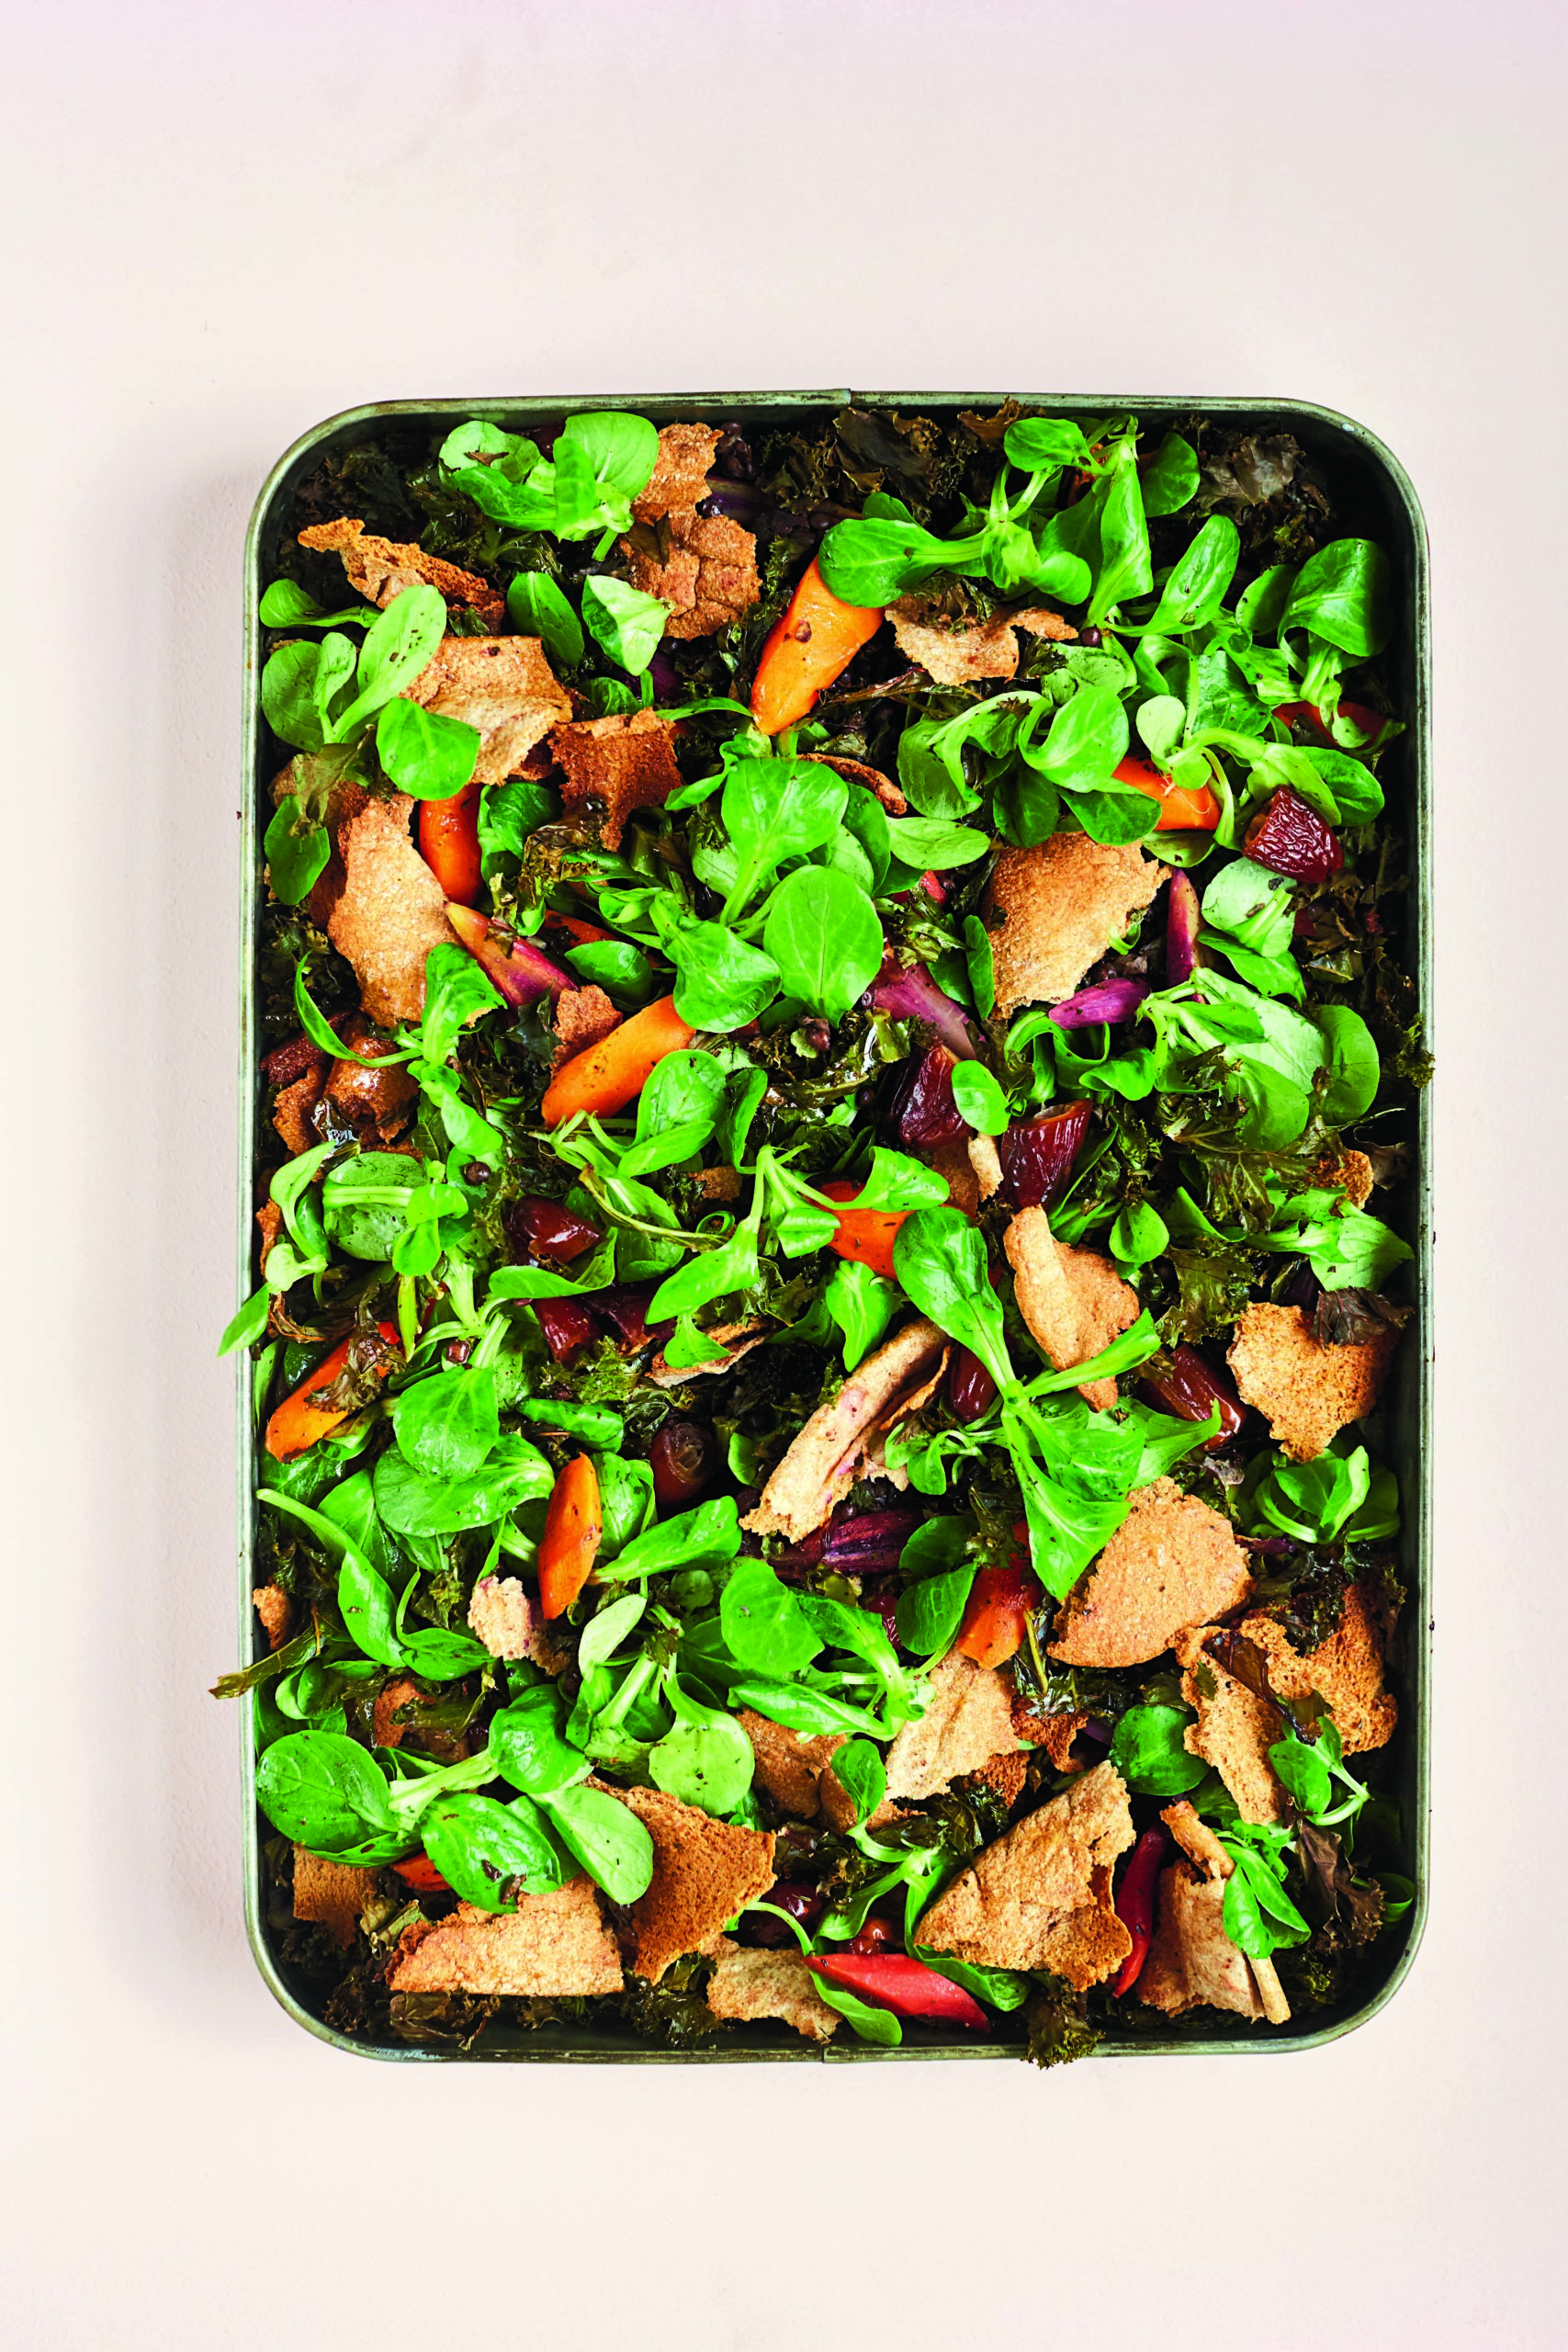 Carrot and Kale Fattoush: Crisp Pitta With Spiced Roasted Carrots, Kale, Dates and Lemon